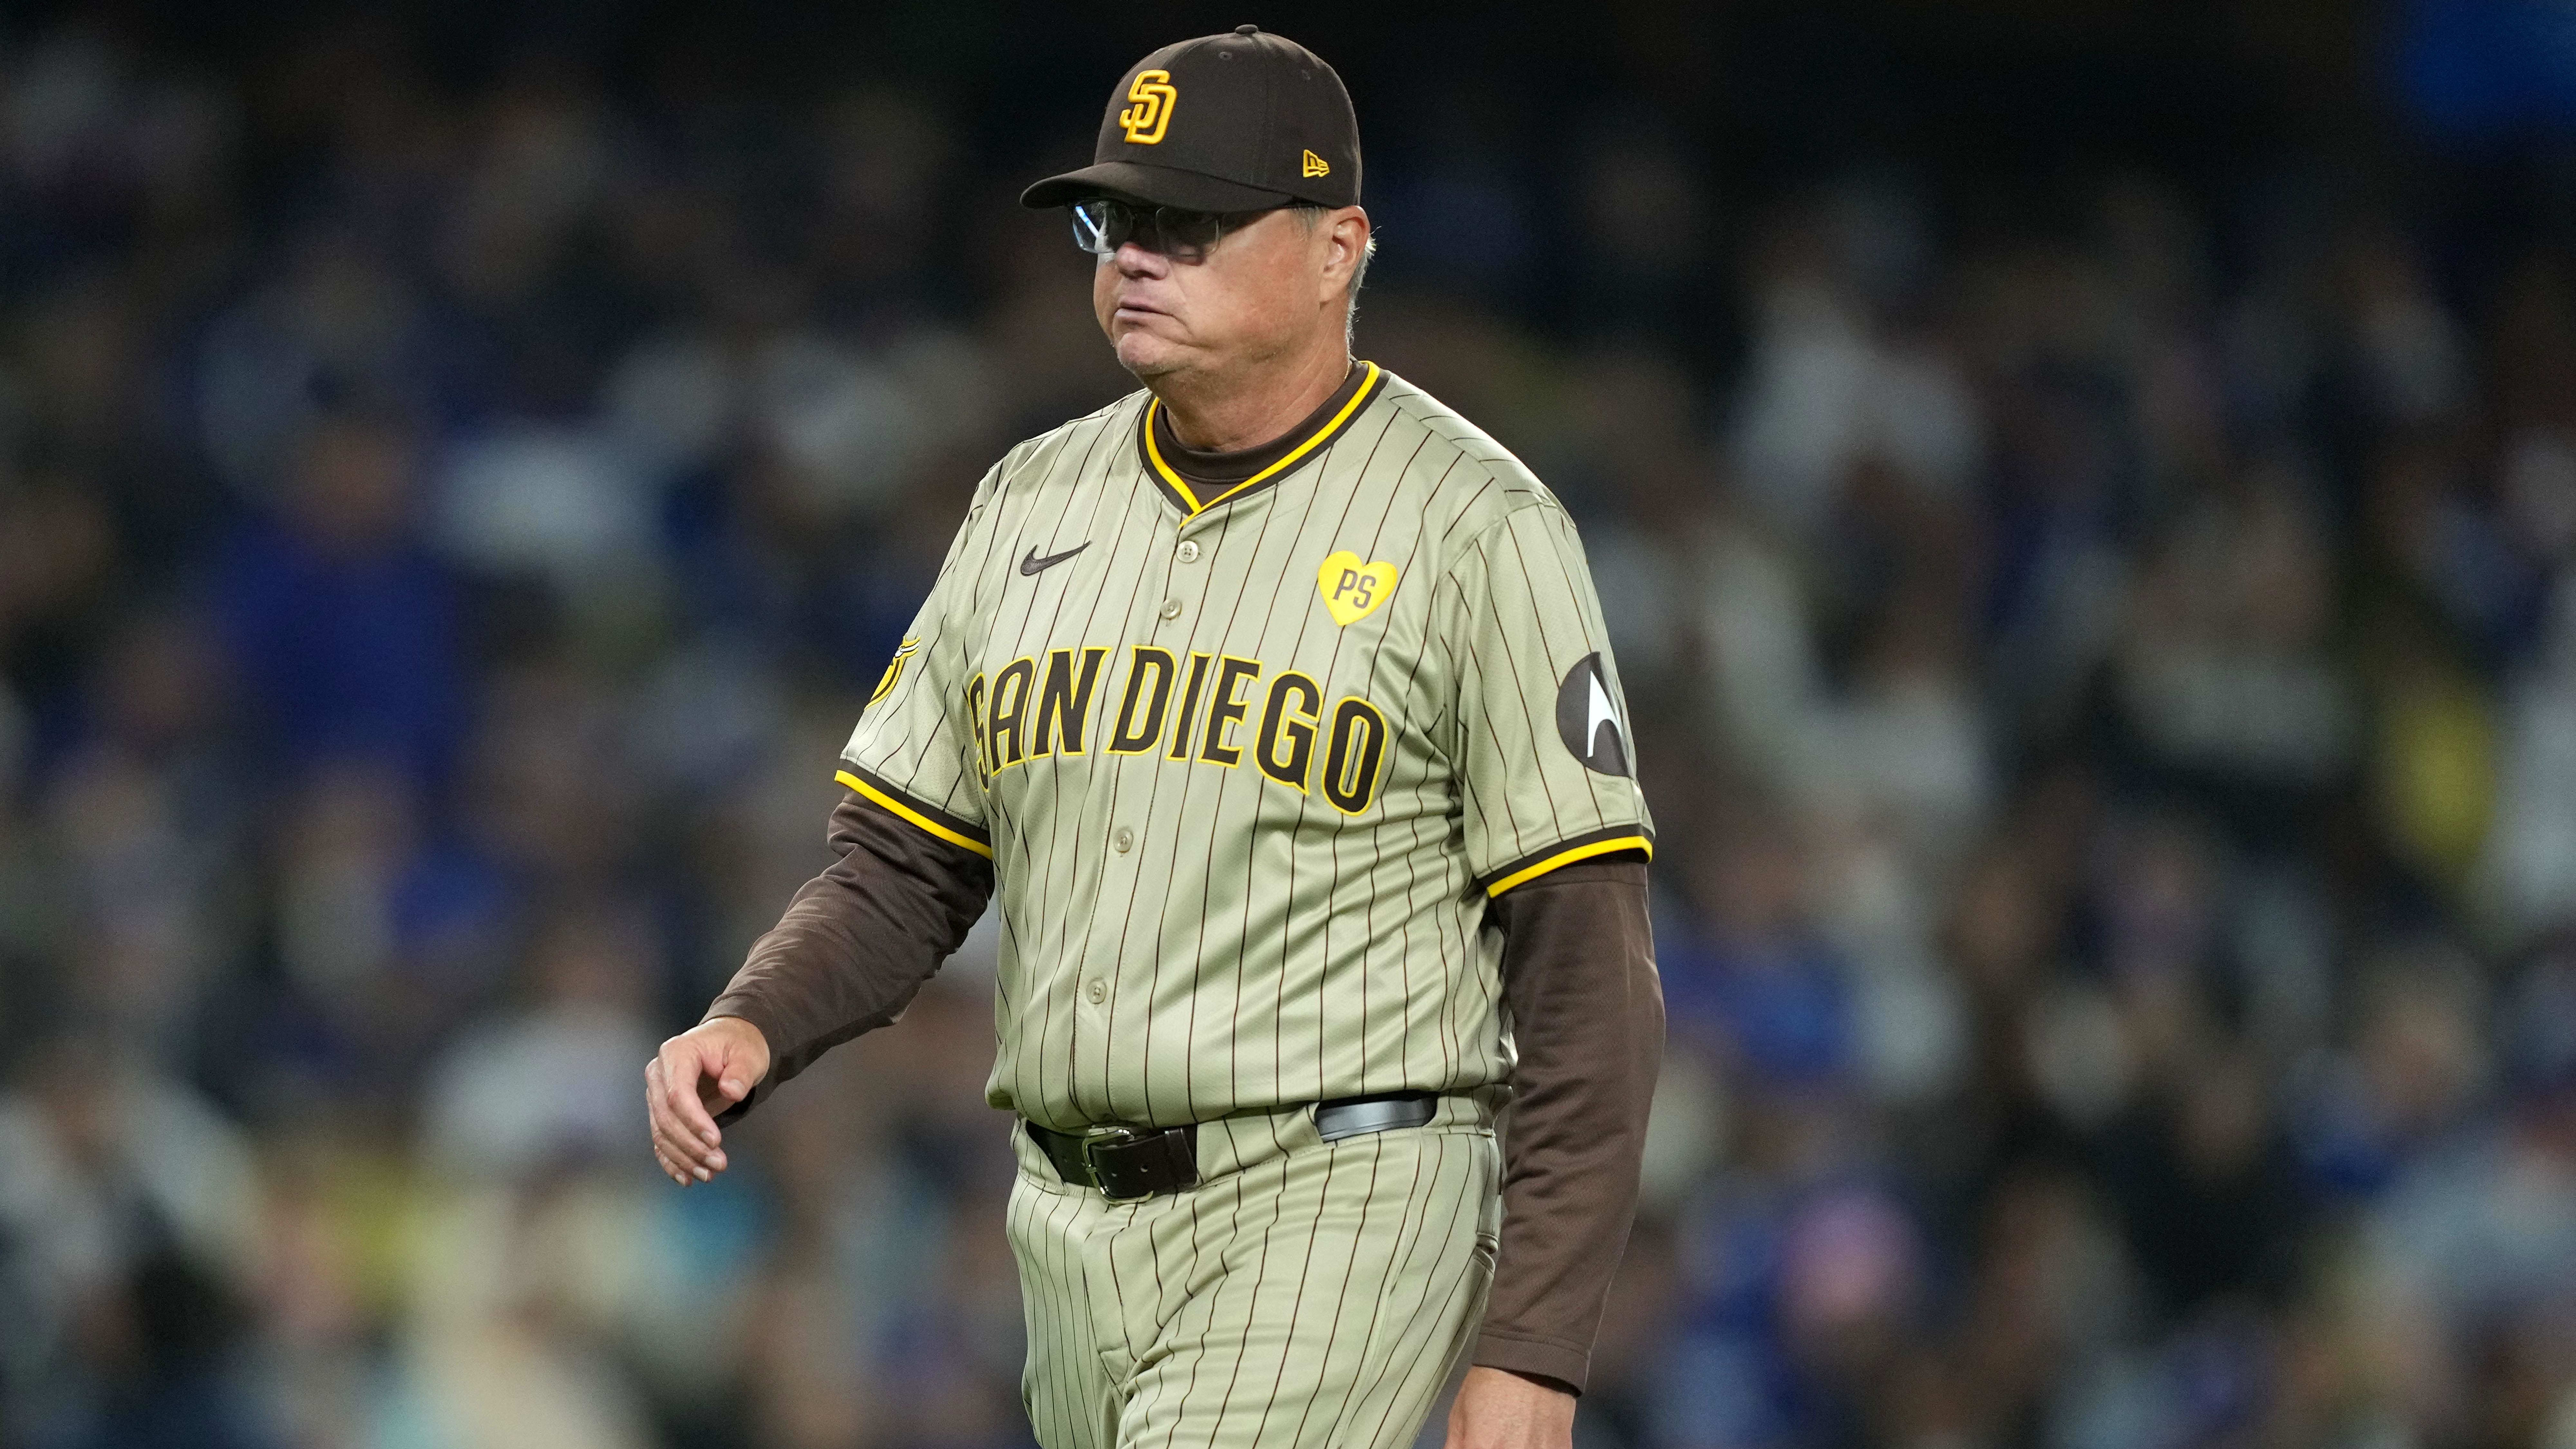 Padres Manager’s Risky Decision to Take Run Off the Scoreboard Actually Worked